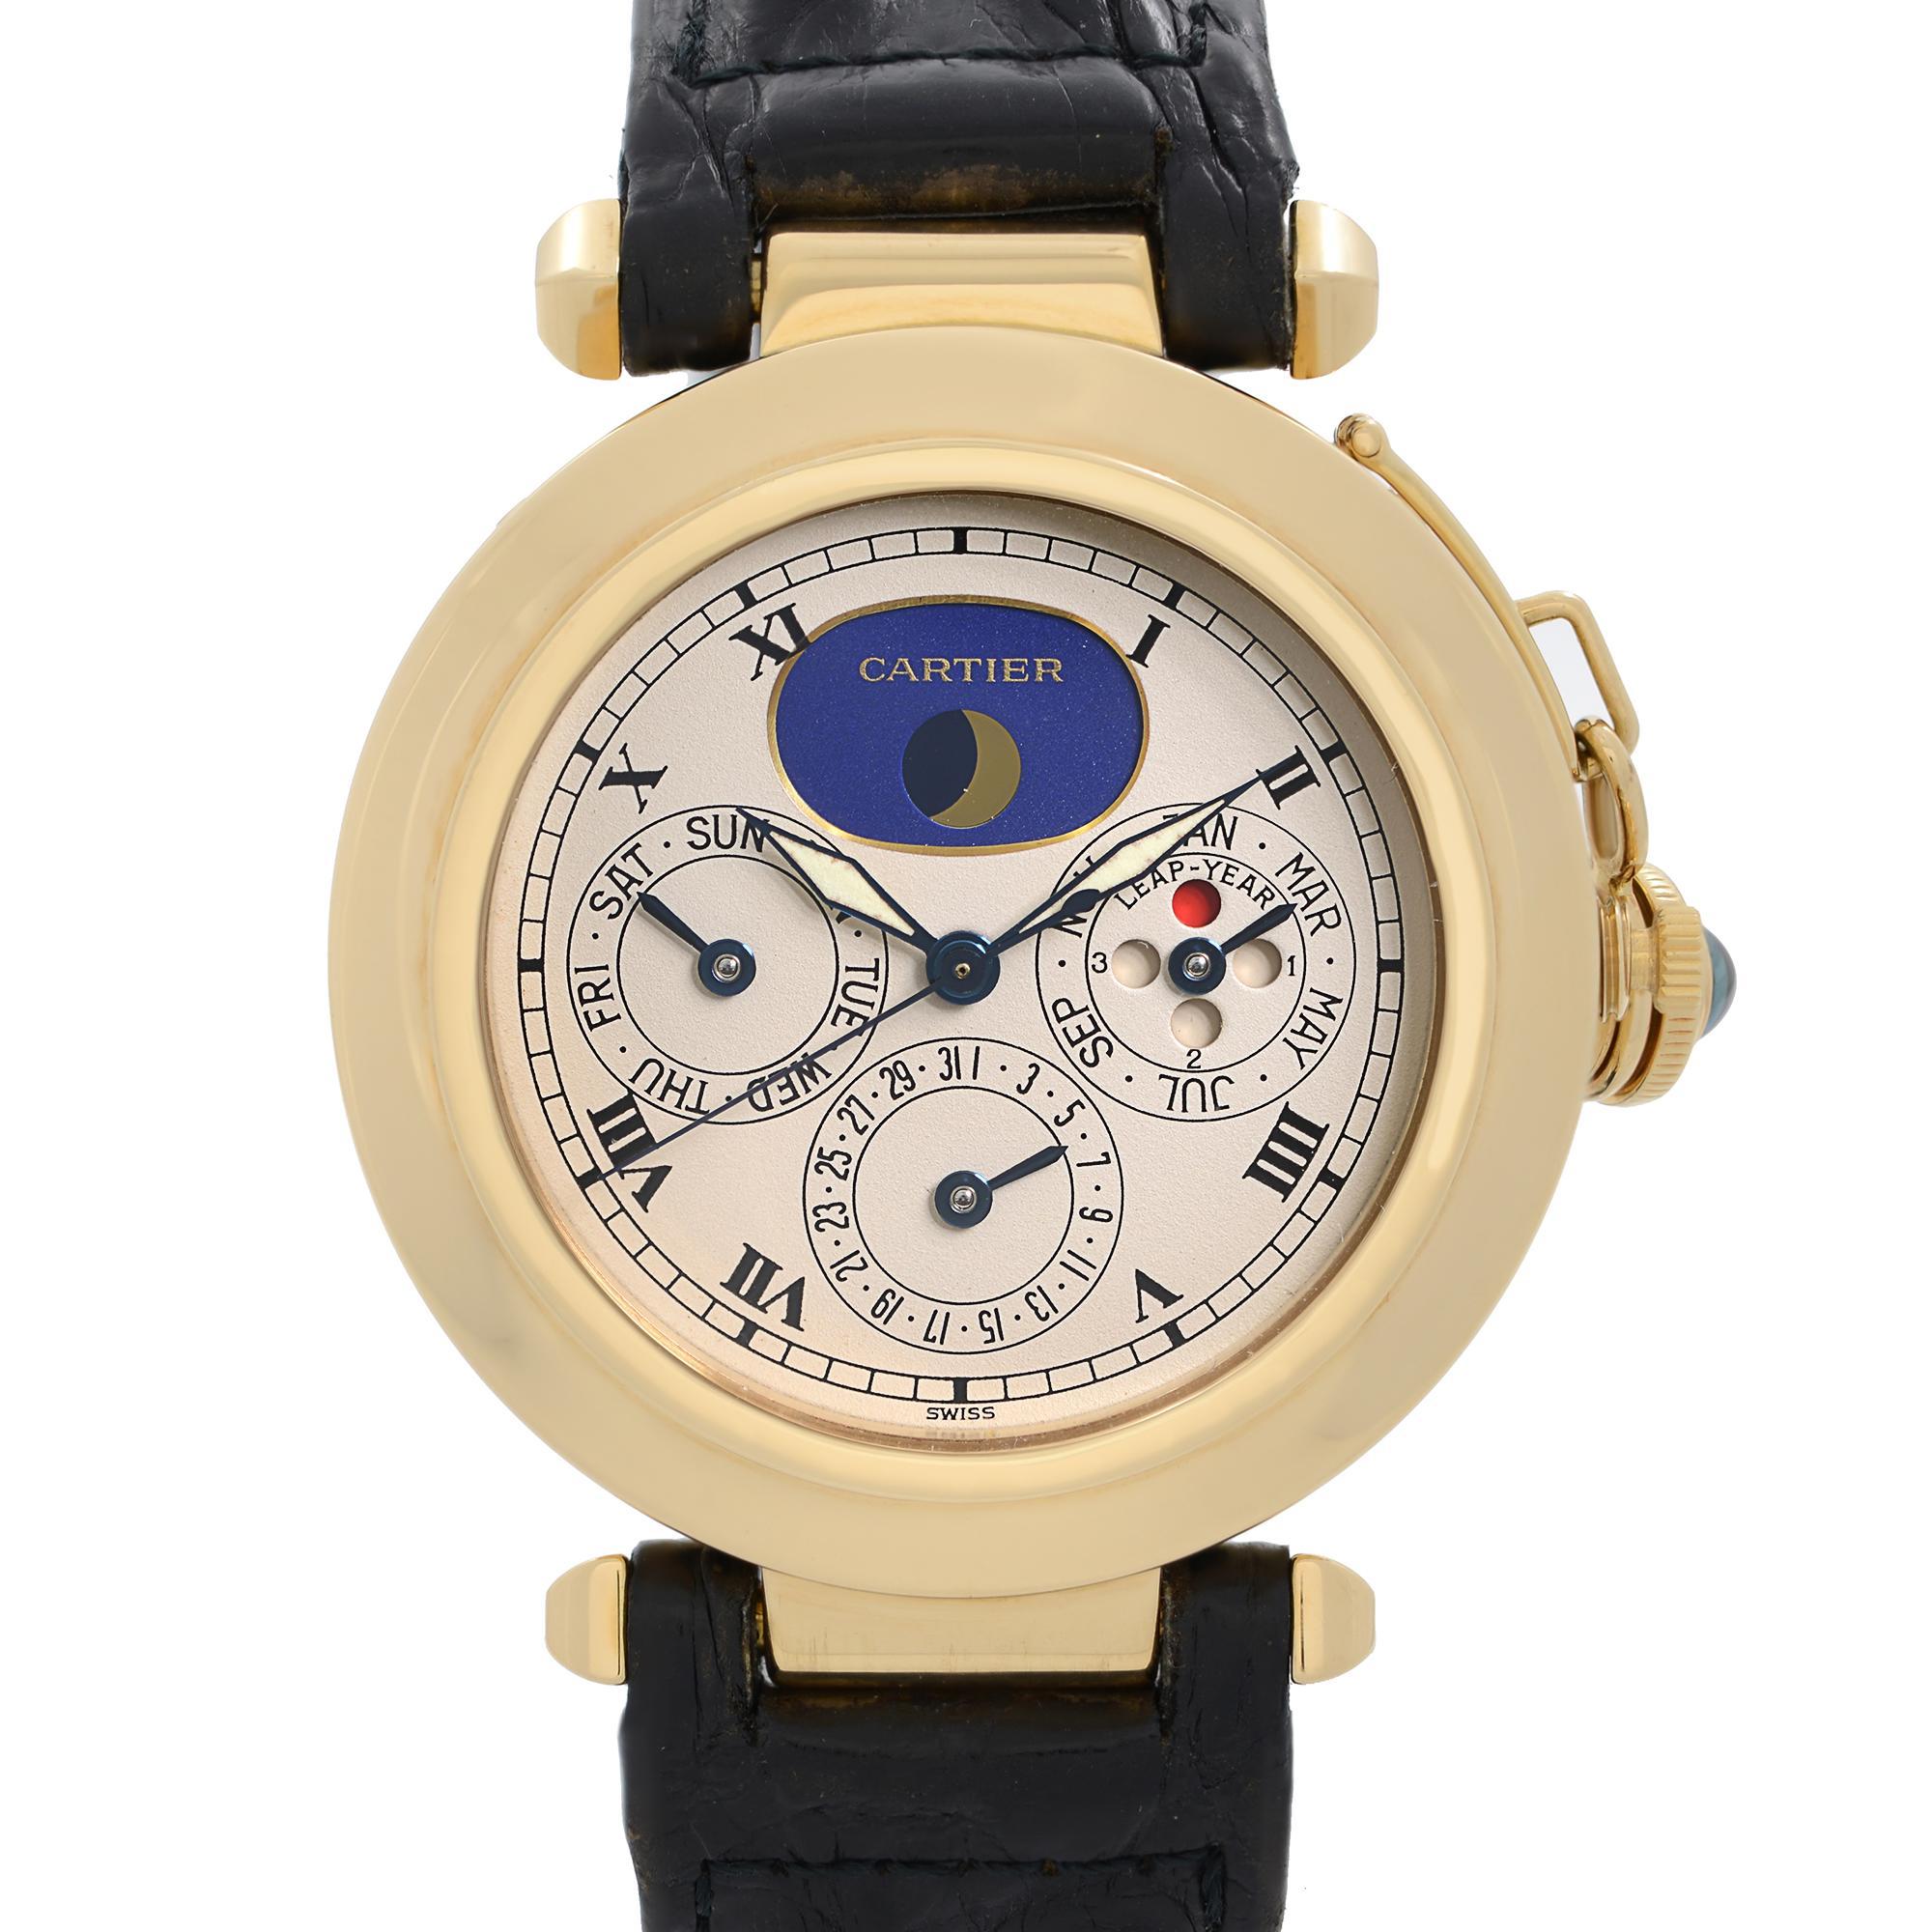 Pre-owned Cartier Pasha 18K Yellow Gold Moonphase Perpetual Calendar Quartz Watch 30003. Minor Scratches on the Case Back, Minor Blemishes on the Black Leather Strap, Some Dirt on the Hands on Closer Inspection. This Beautiful Timepiece is Powered